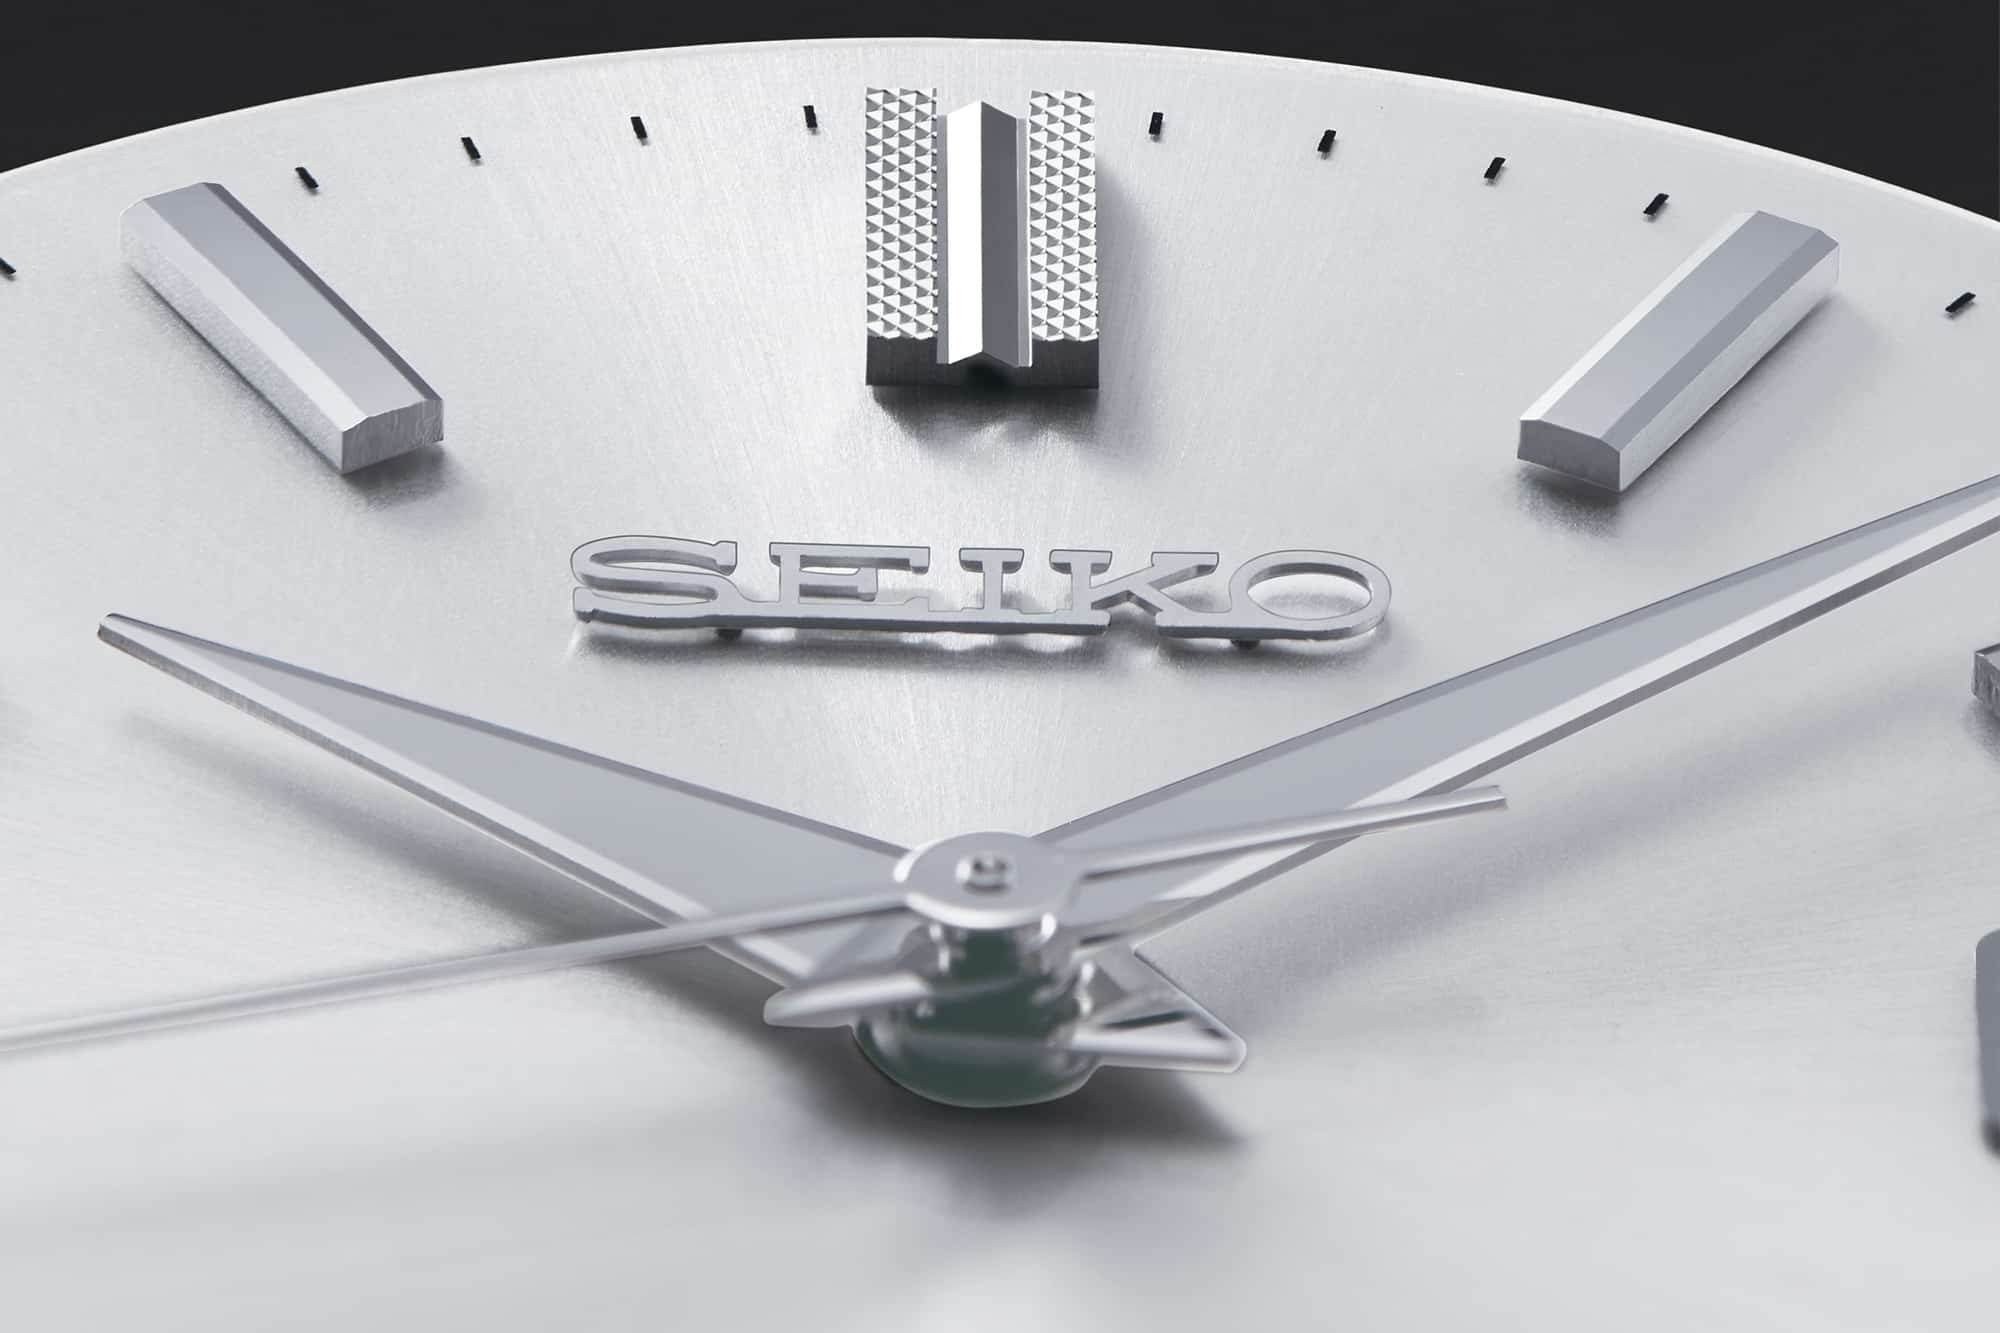 Seiko Starts a Big Anniversary Year with a Tribute to a Much Admired King  Seiko from their Past - Worn & Wound